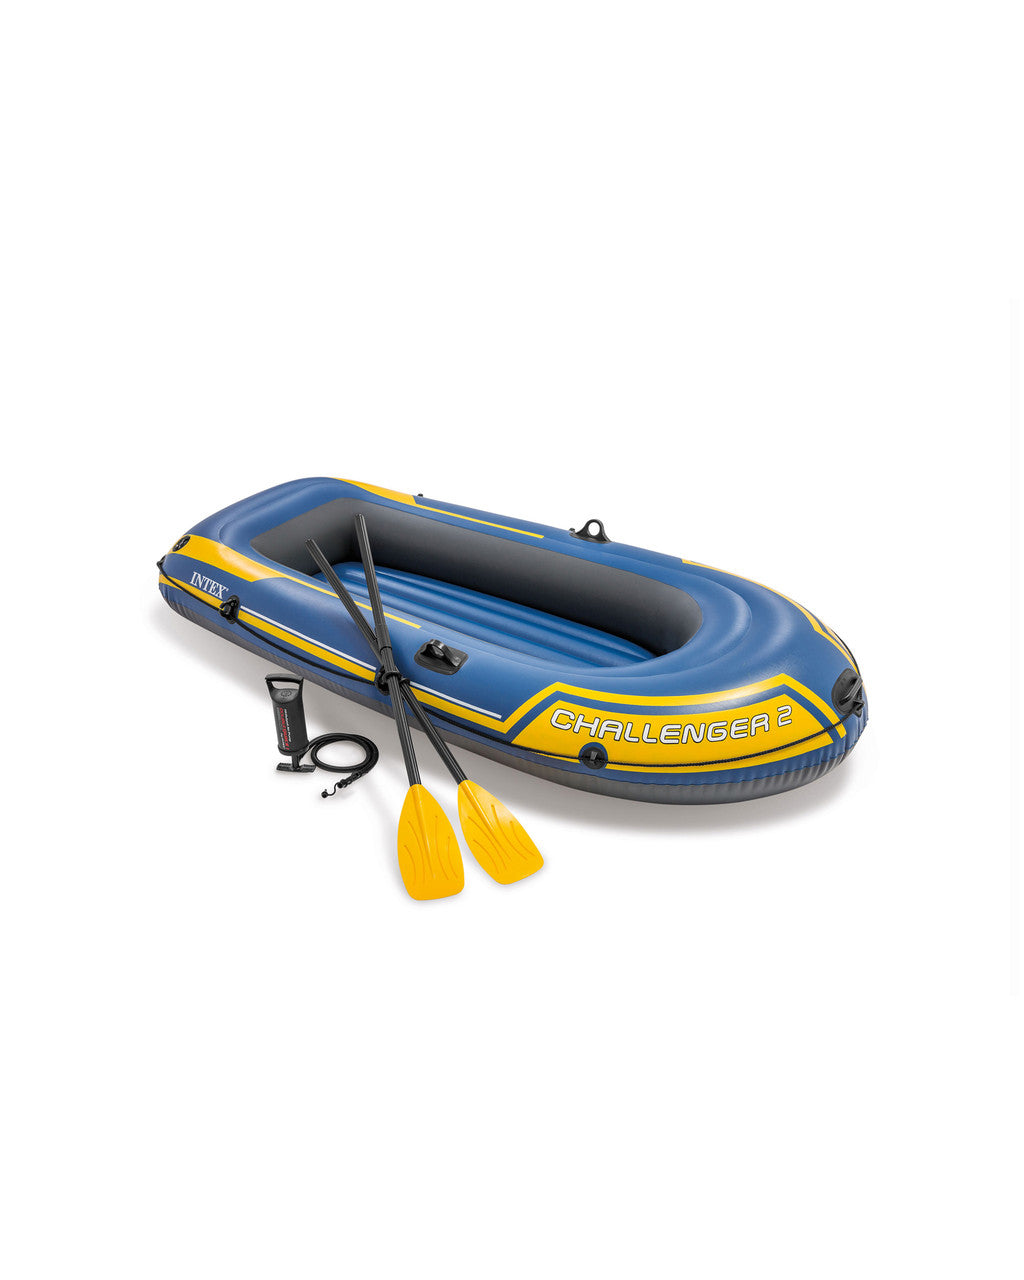 Intex® Challenger™ 2 Inflatable Boat Set - 2 Person